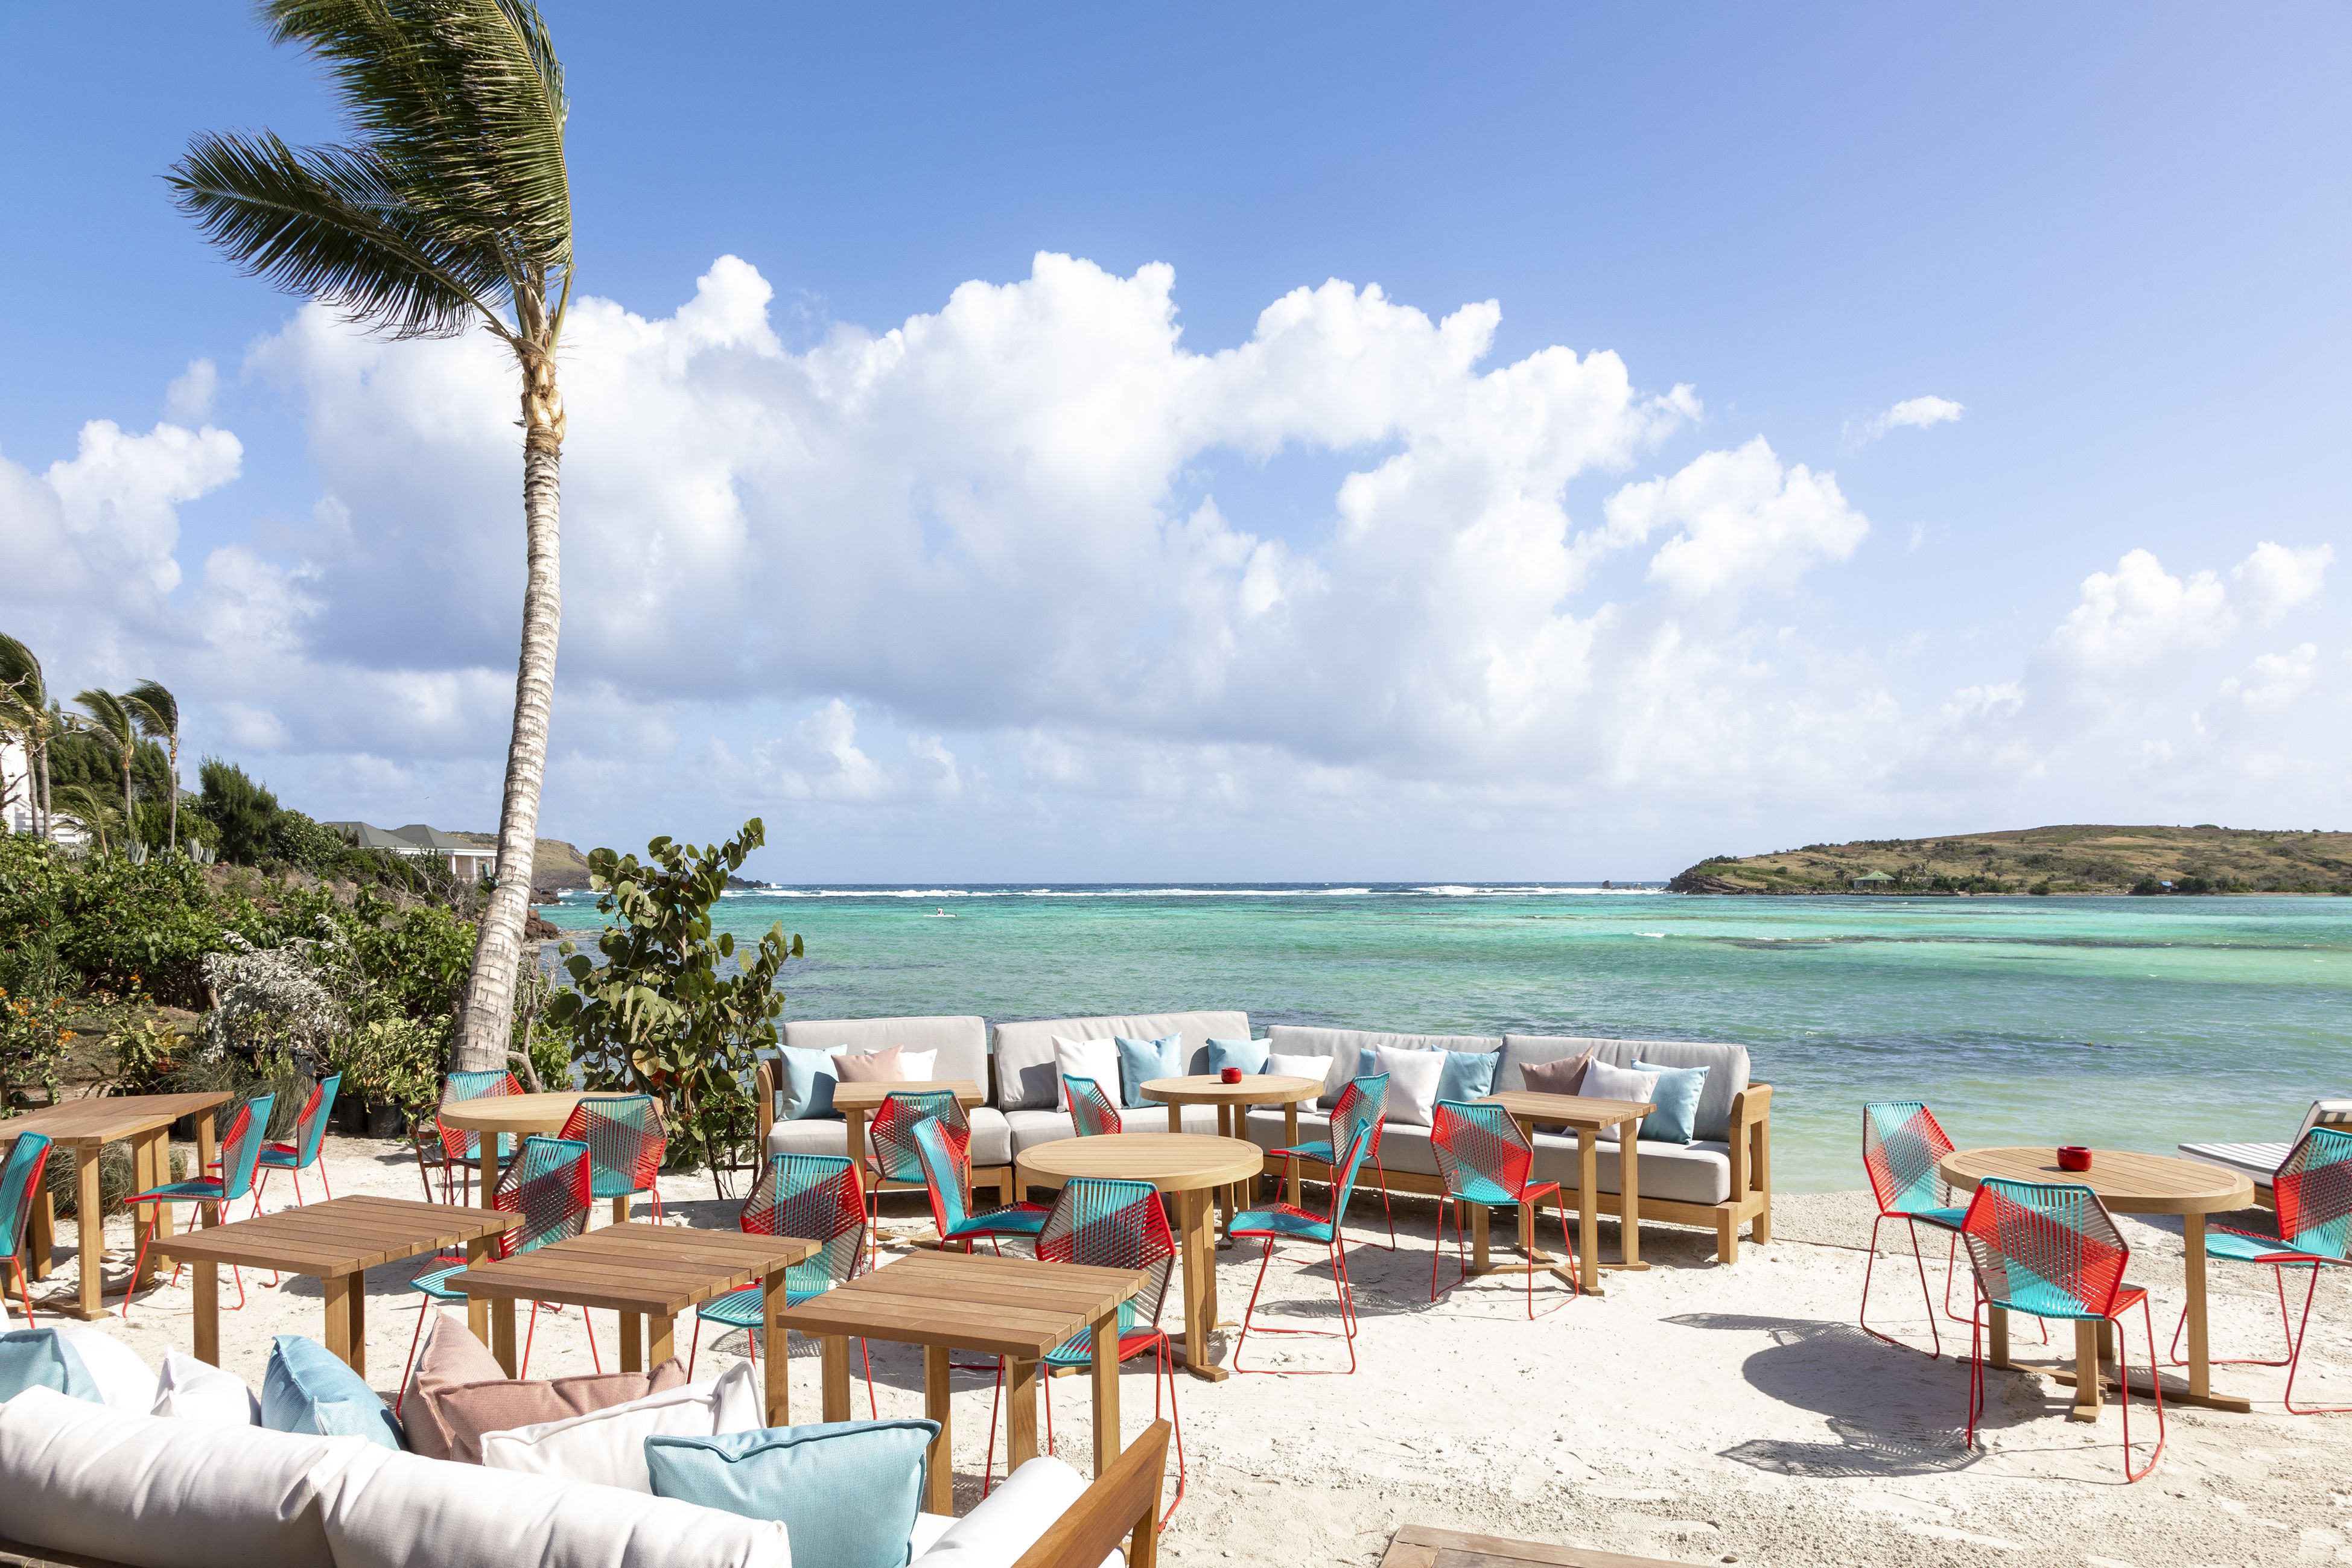 St. Barts: Endless beach-going, eating, drinking and shopping